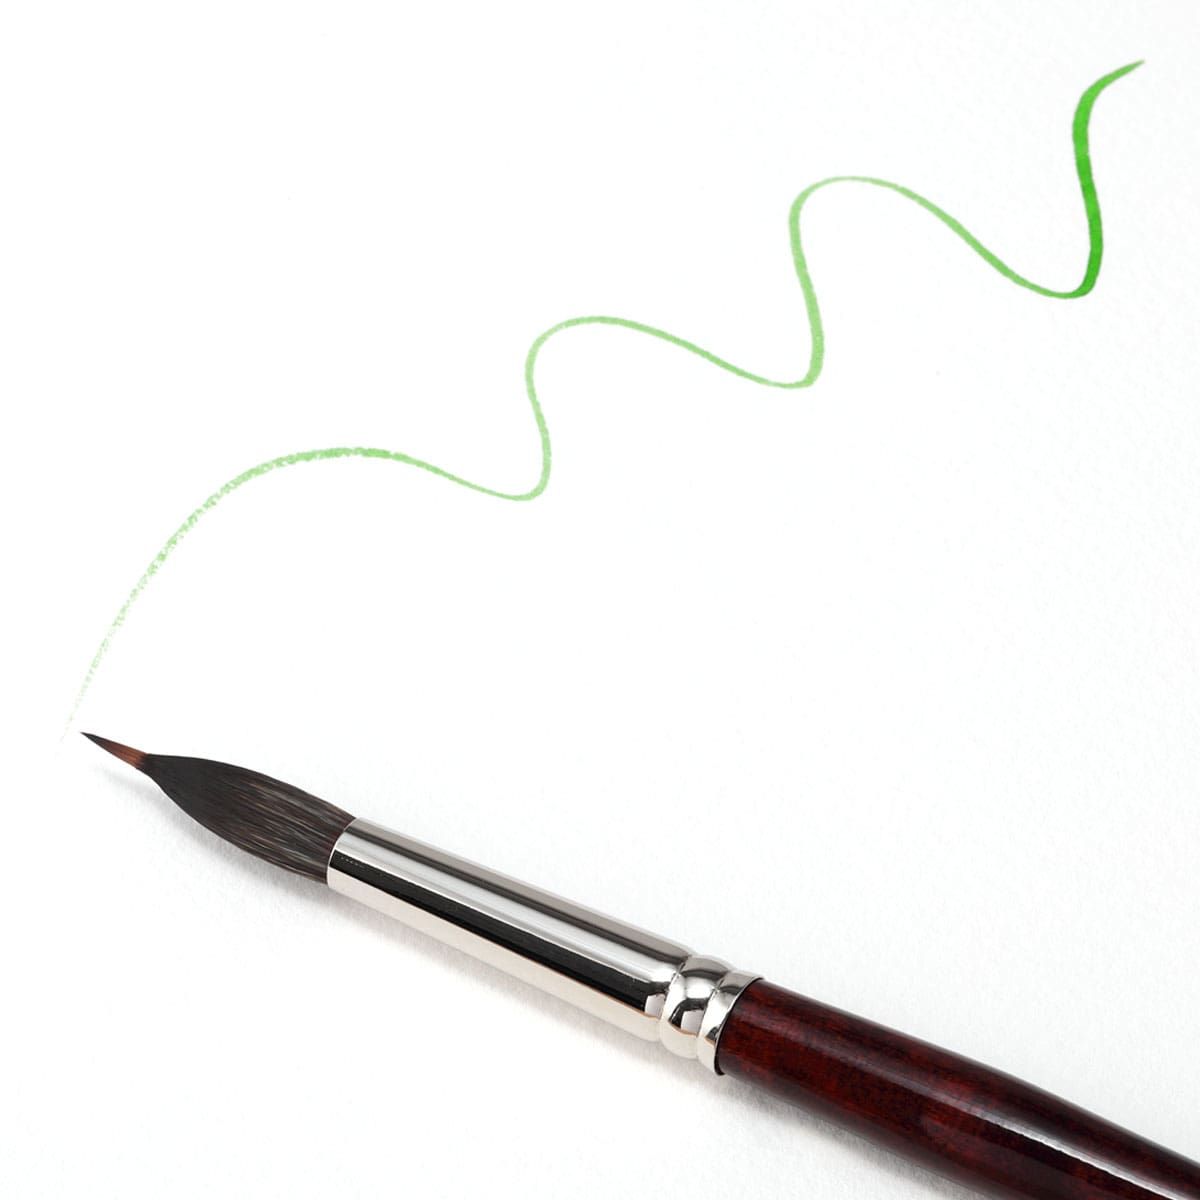 Create Quick Lively Curvy Lines